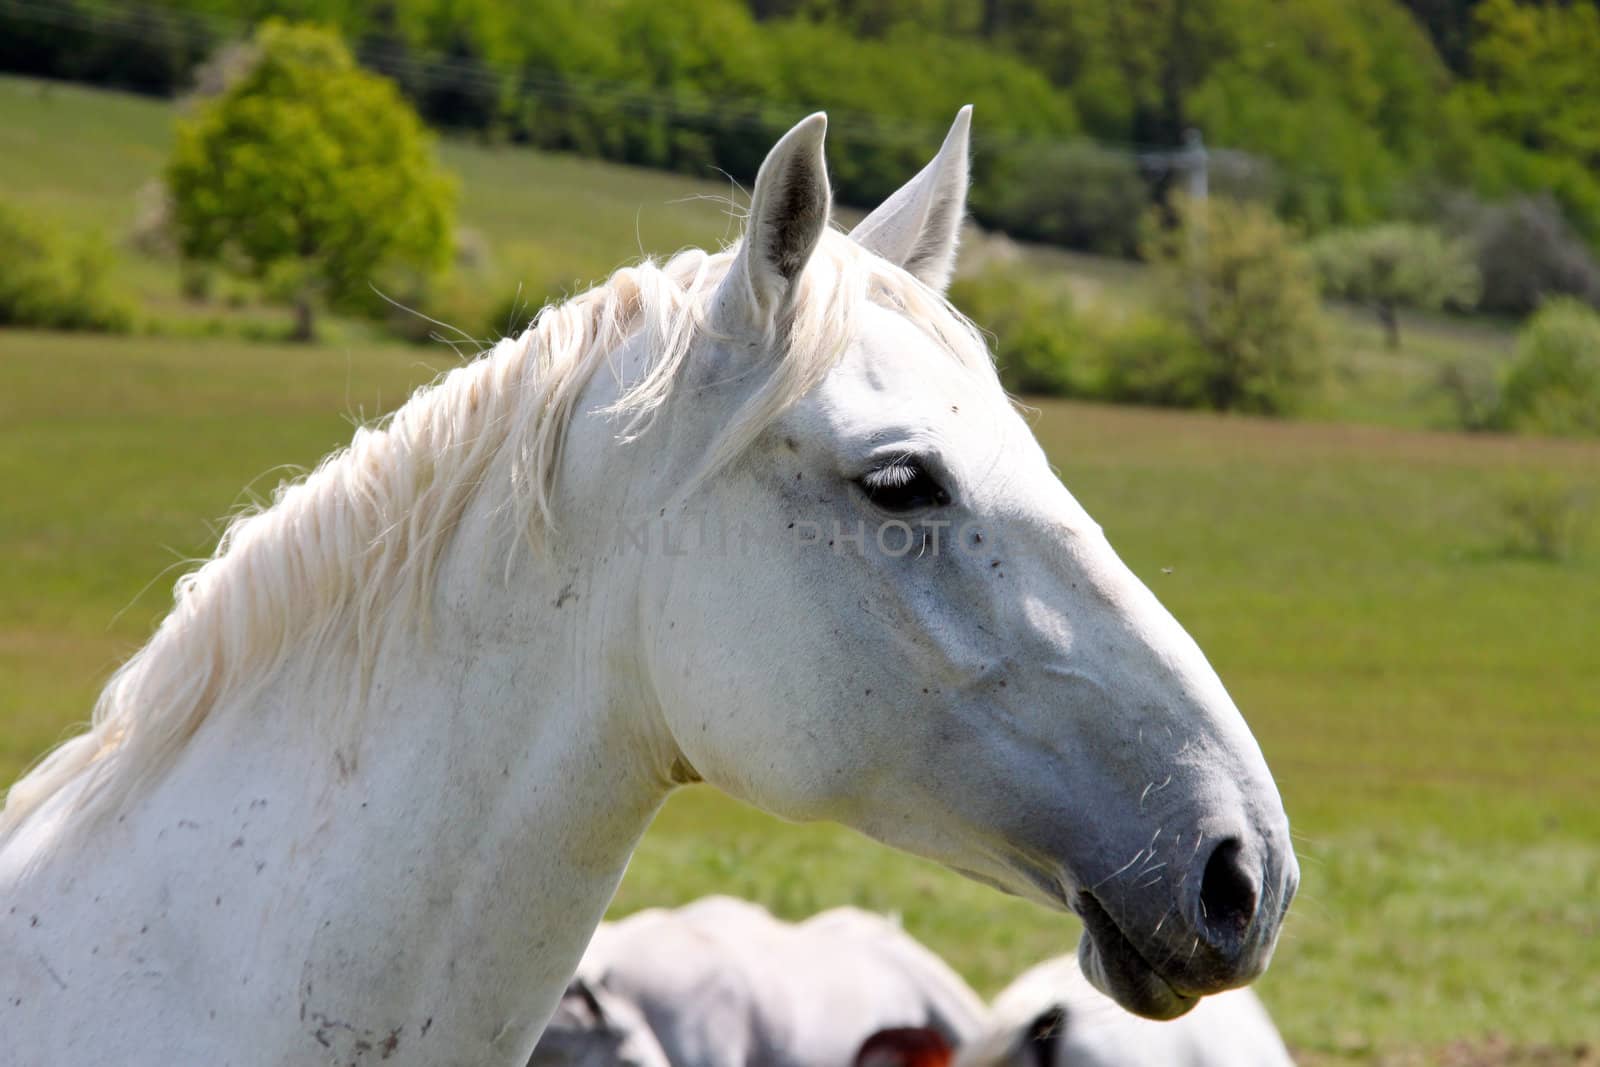 A white horse is passing by the camera